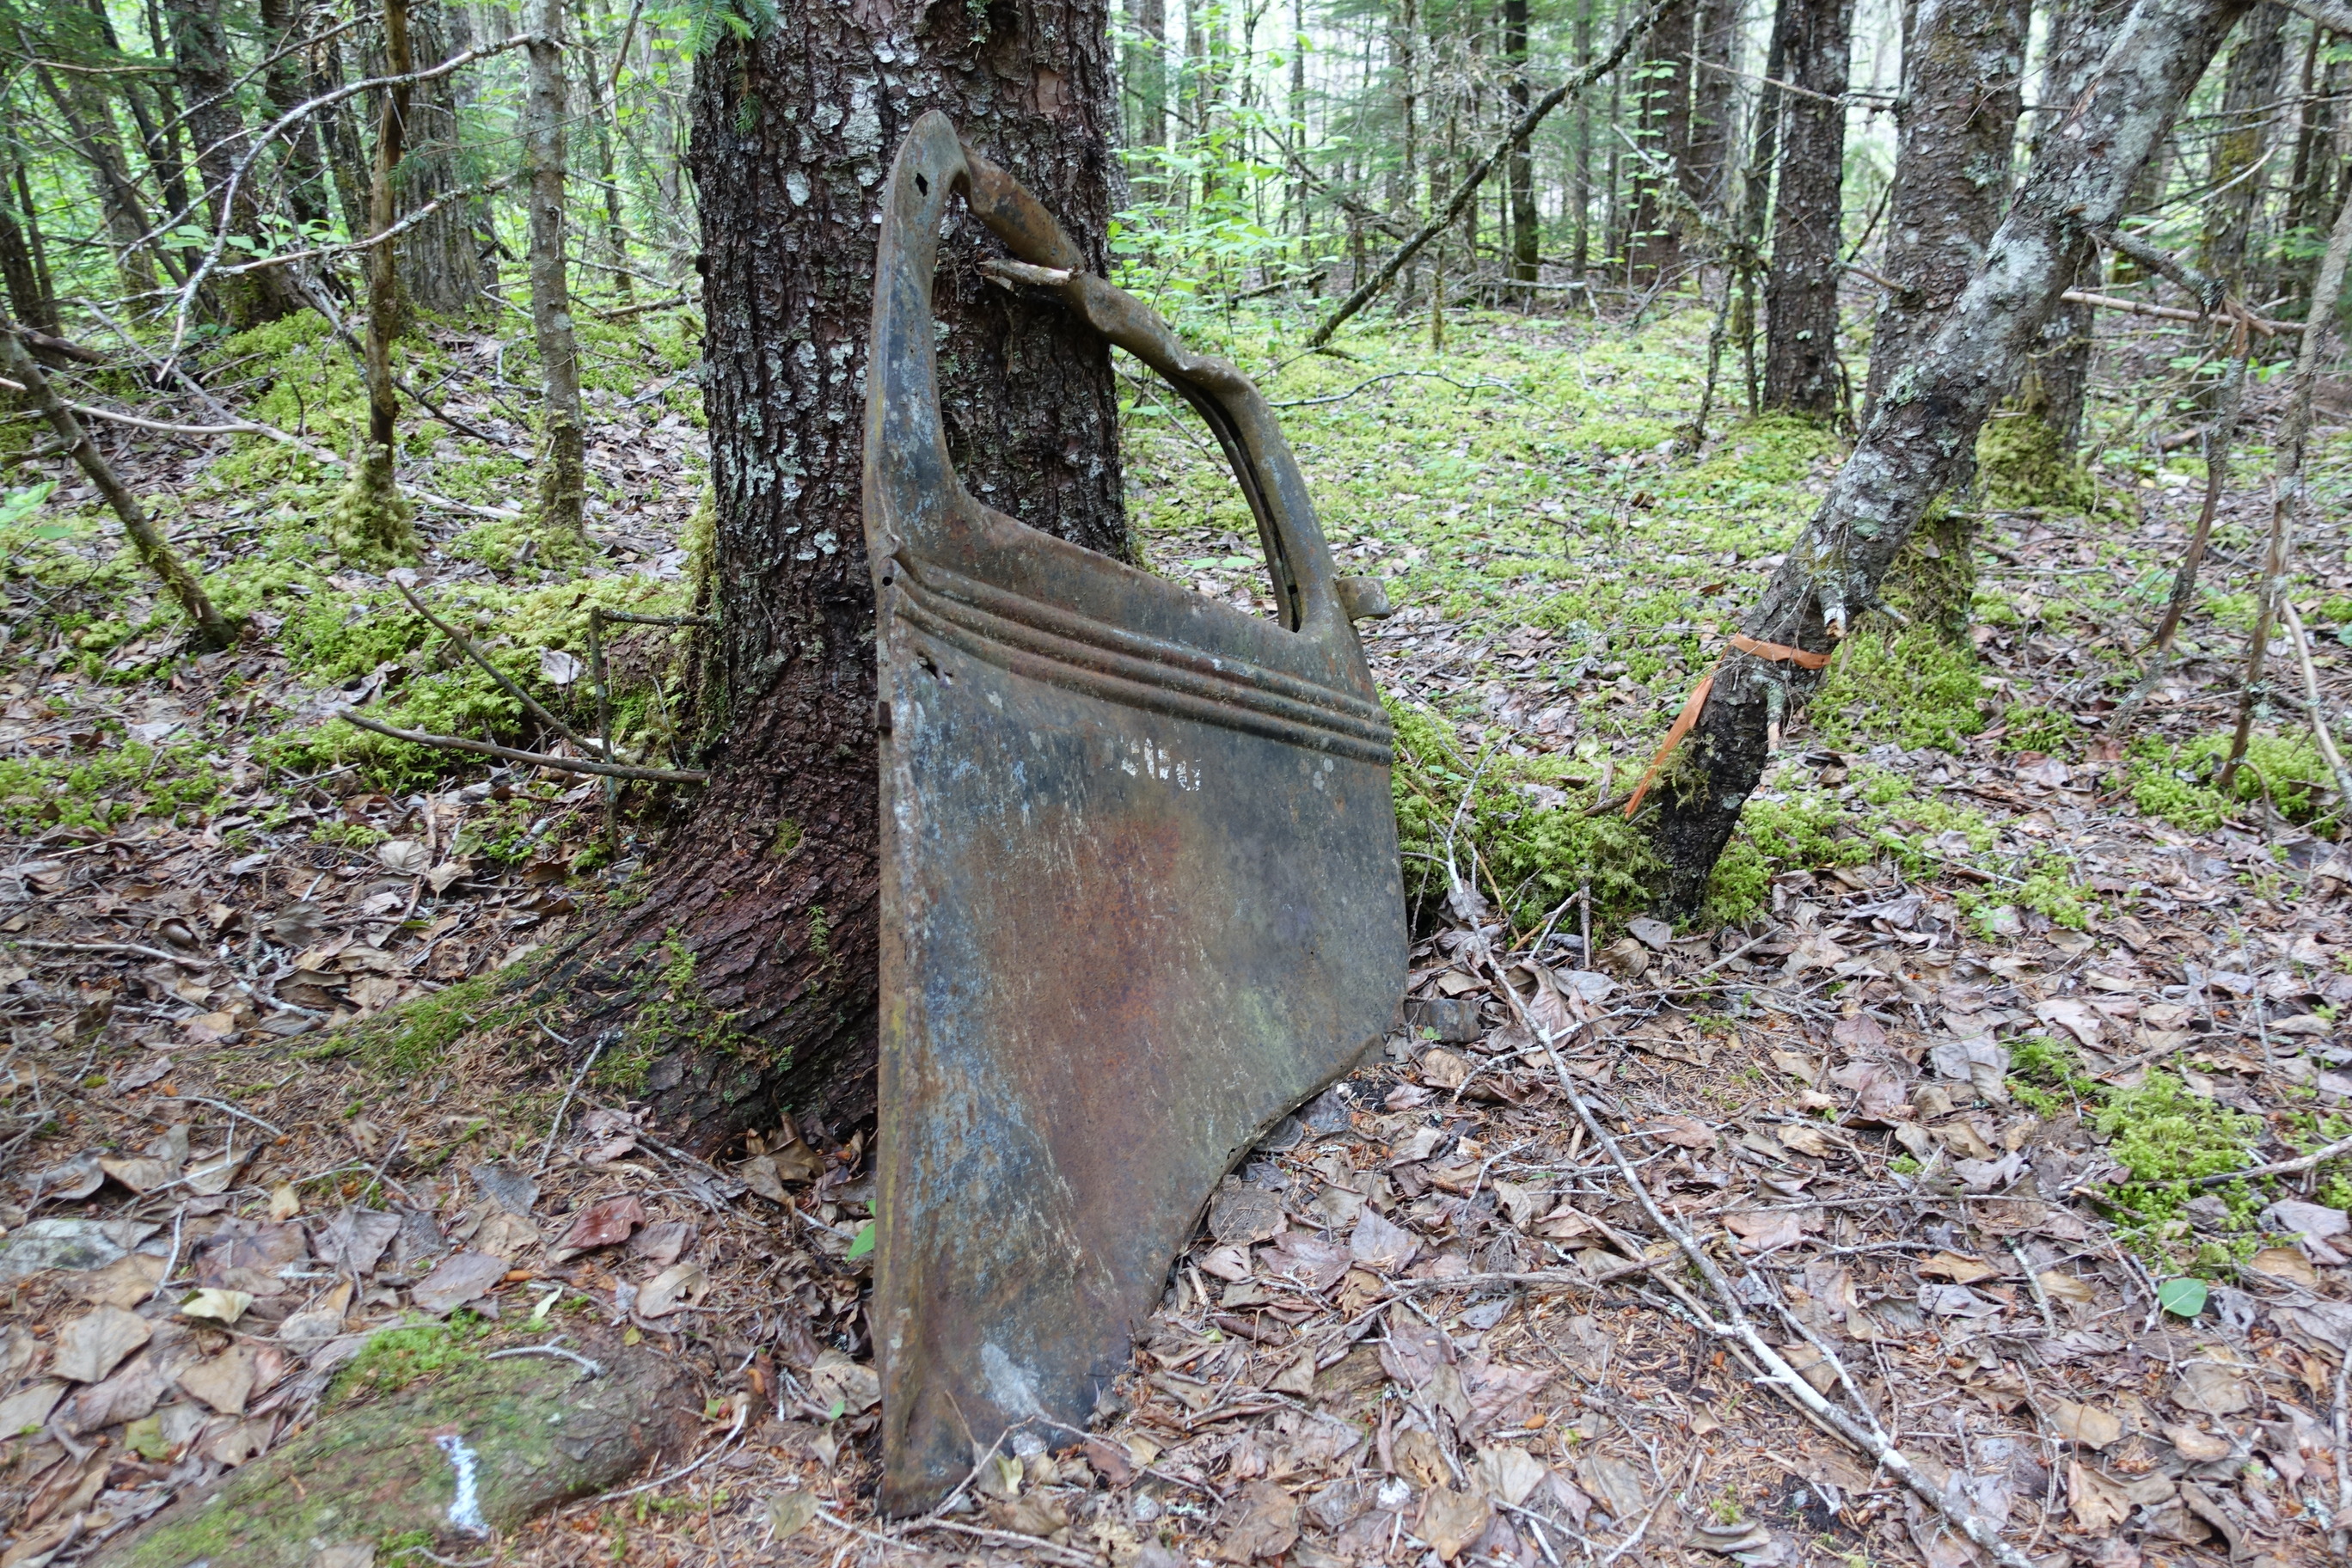 Rusted metal door, a remnant of the Hosford Camp Site.